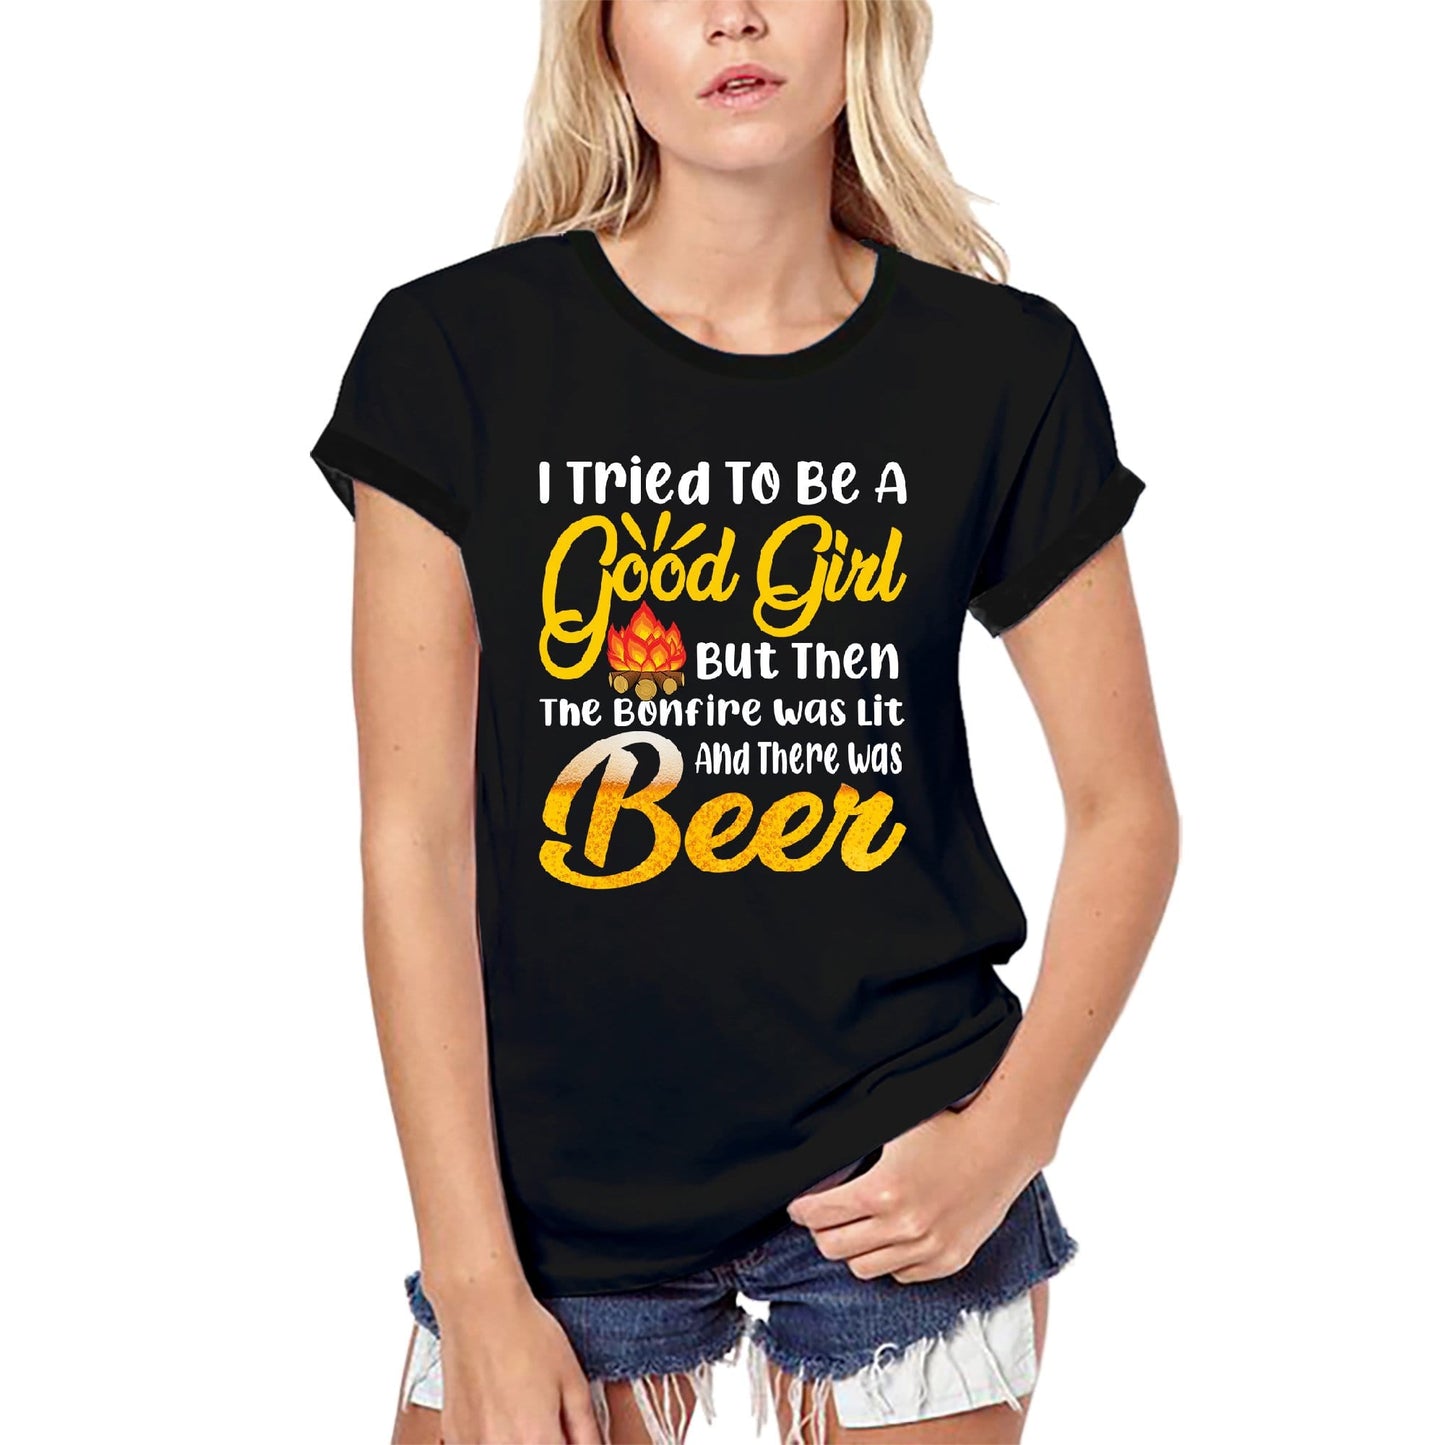 ULTRABASIC Women's Organic T-Shirt I Tried to be a Good Girl but Then the Bonfire Was Lit and There Was Beer - Beer Lover Tee Shirt